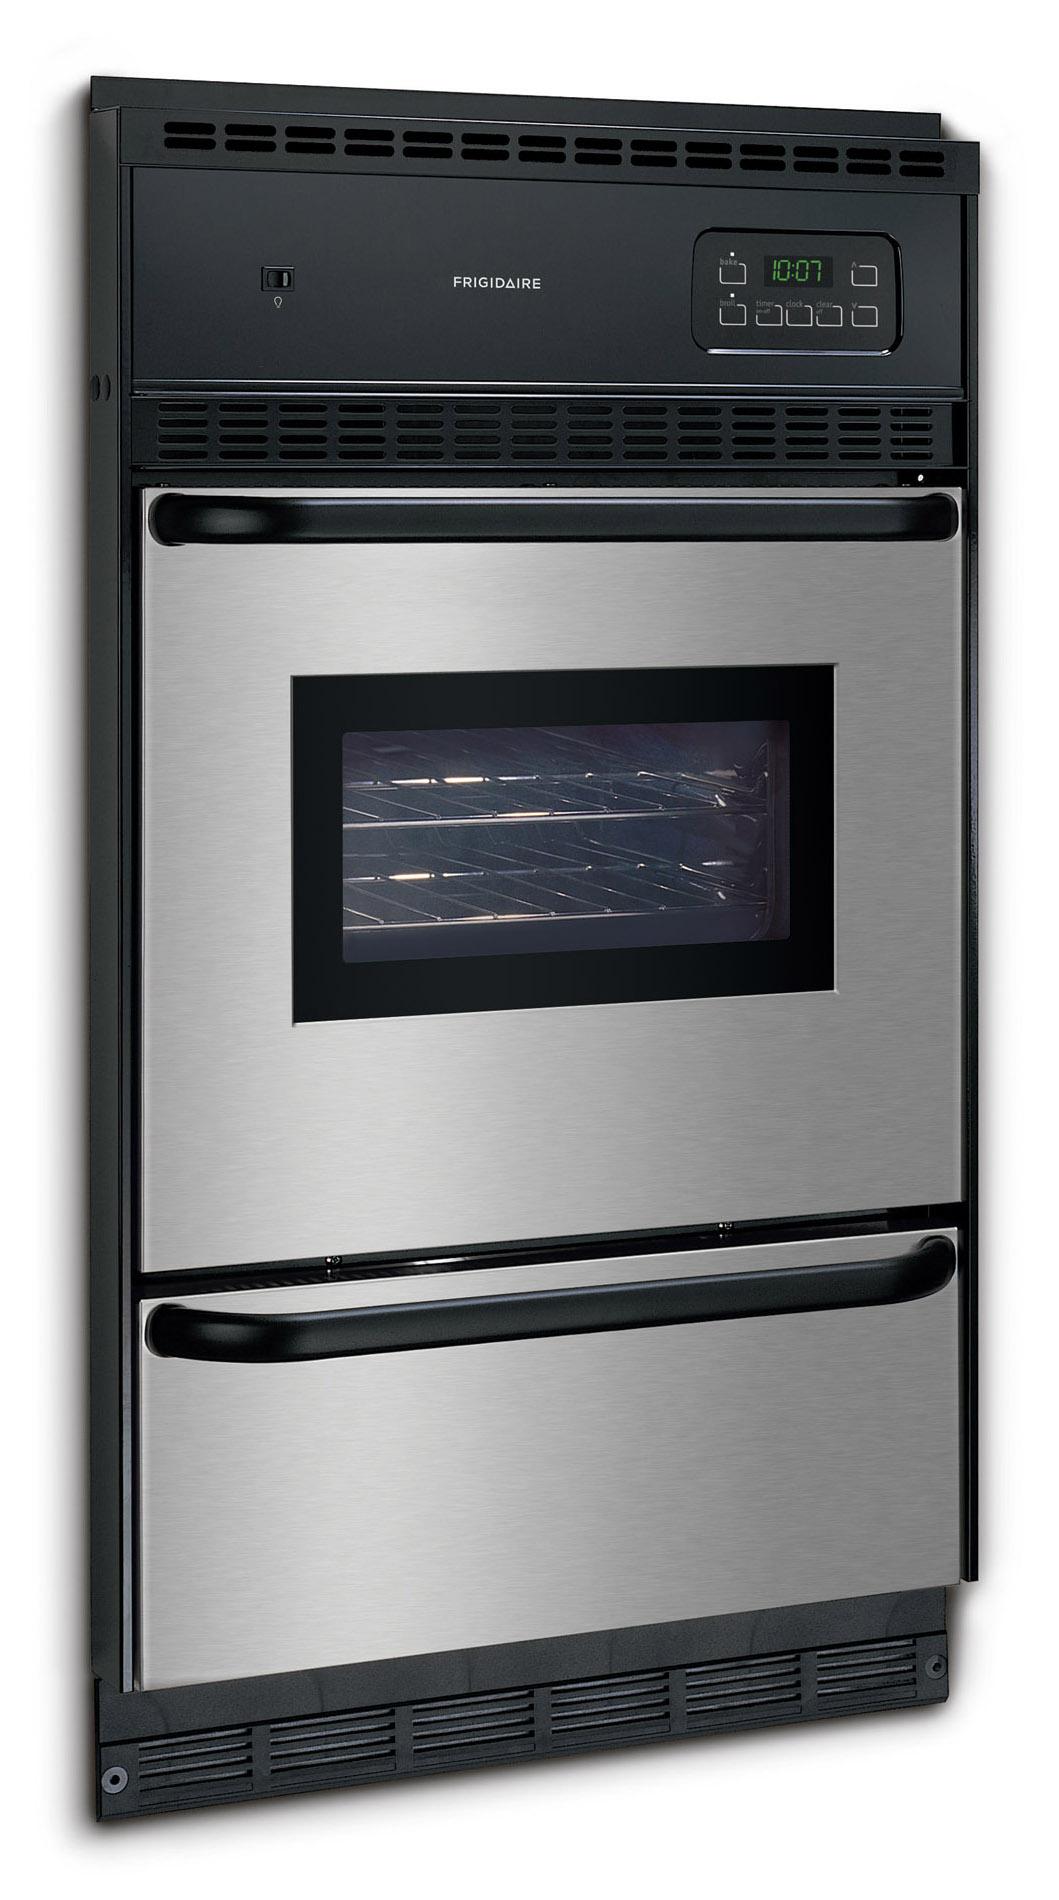 Frigidaire FGB24L2EC 24" Single Gas Wall Oven with Manual Clean